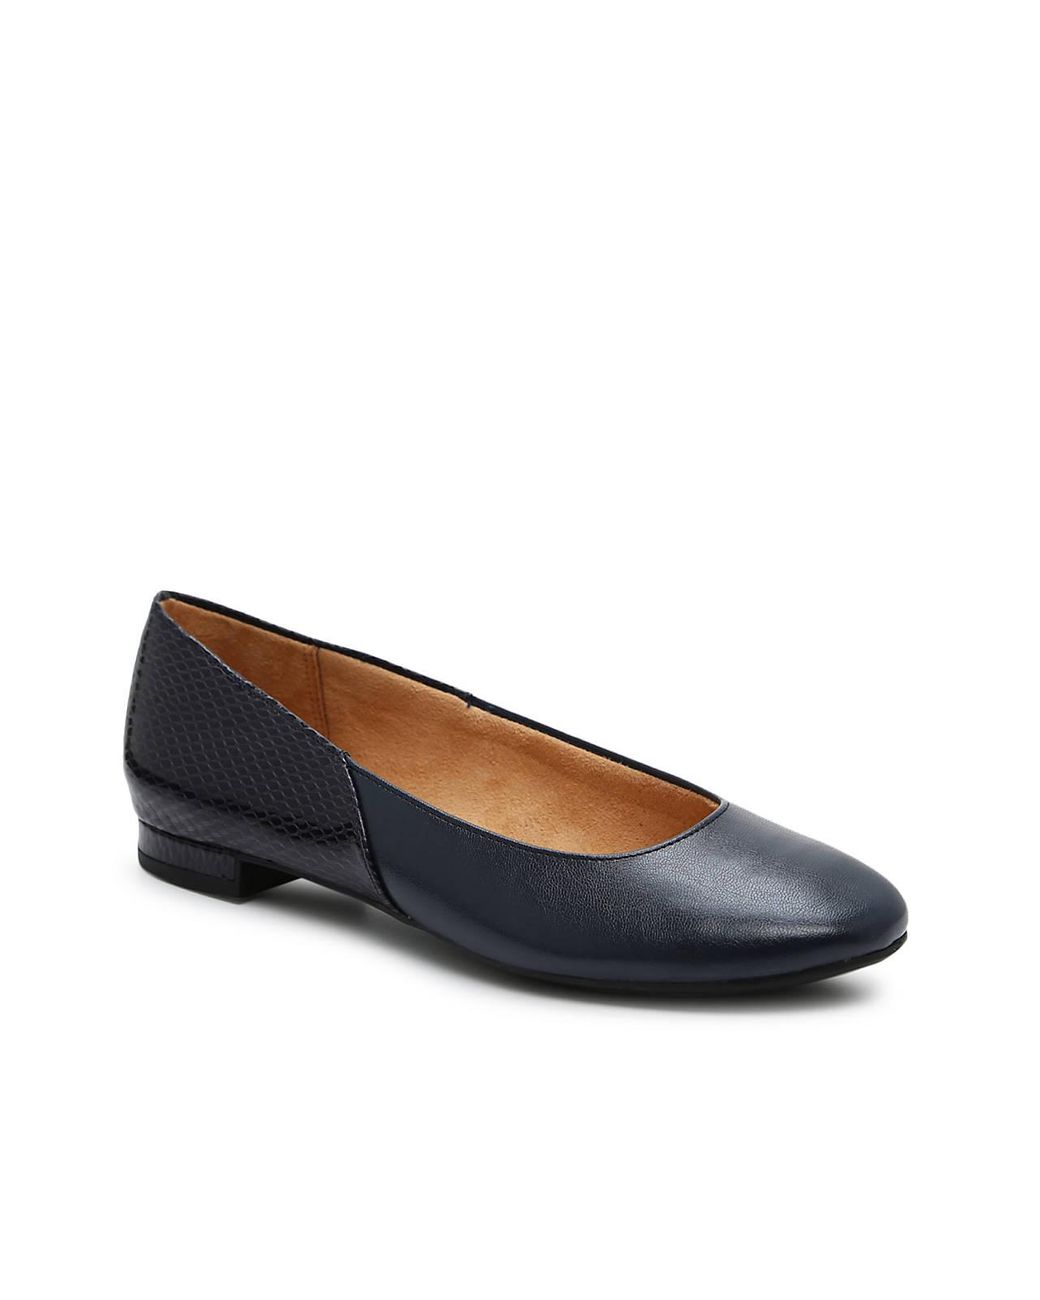 abella sofiah loafer